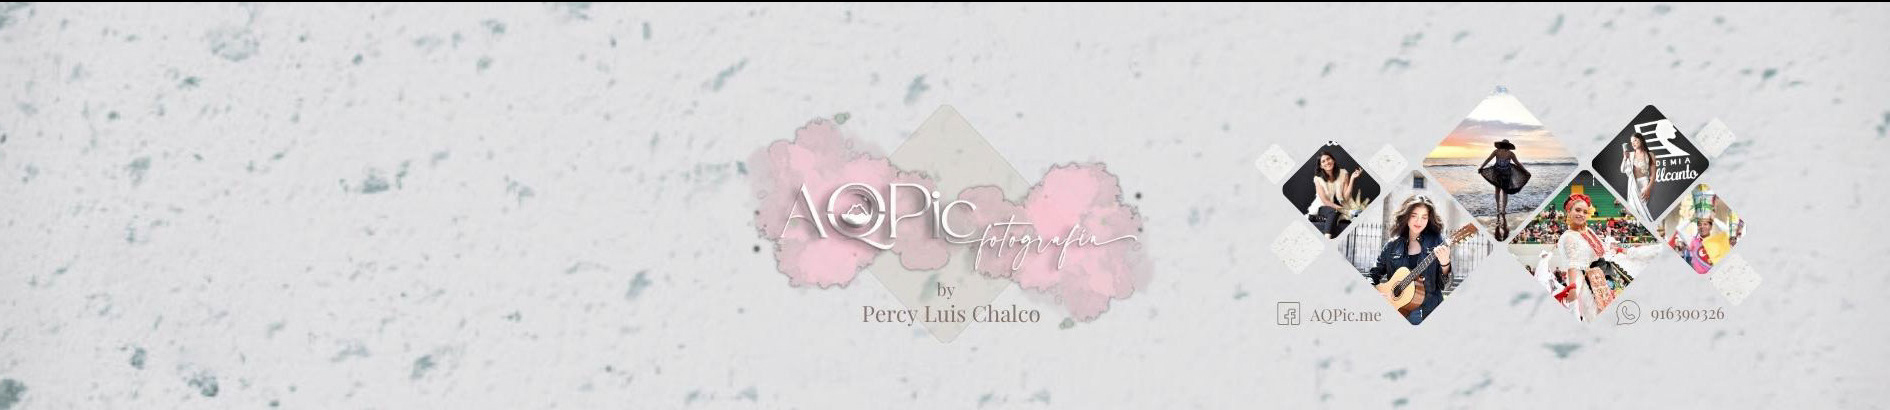 Percy Luis Chalco Paredes's profile banner